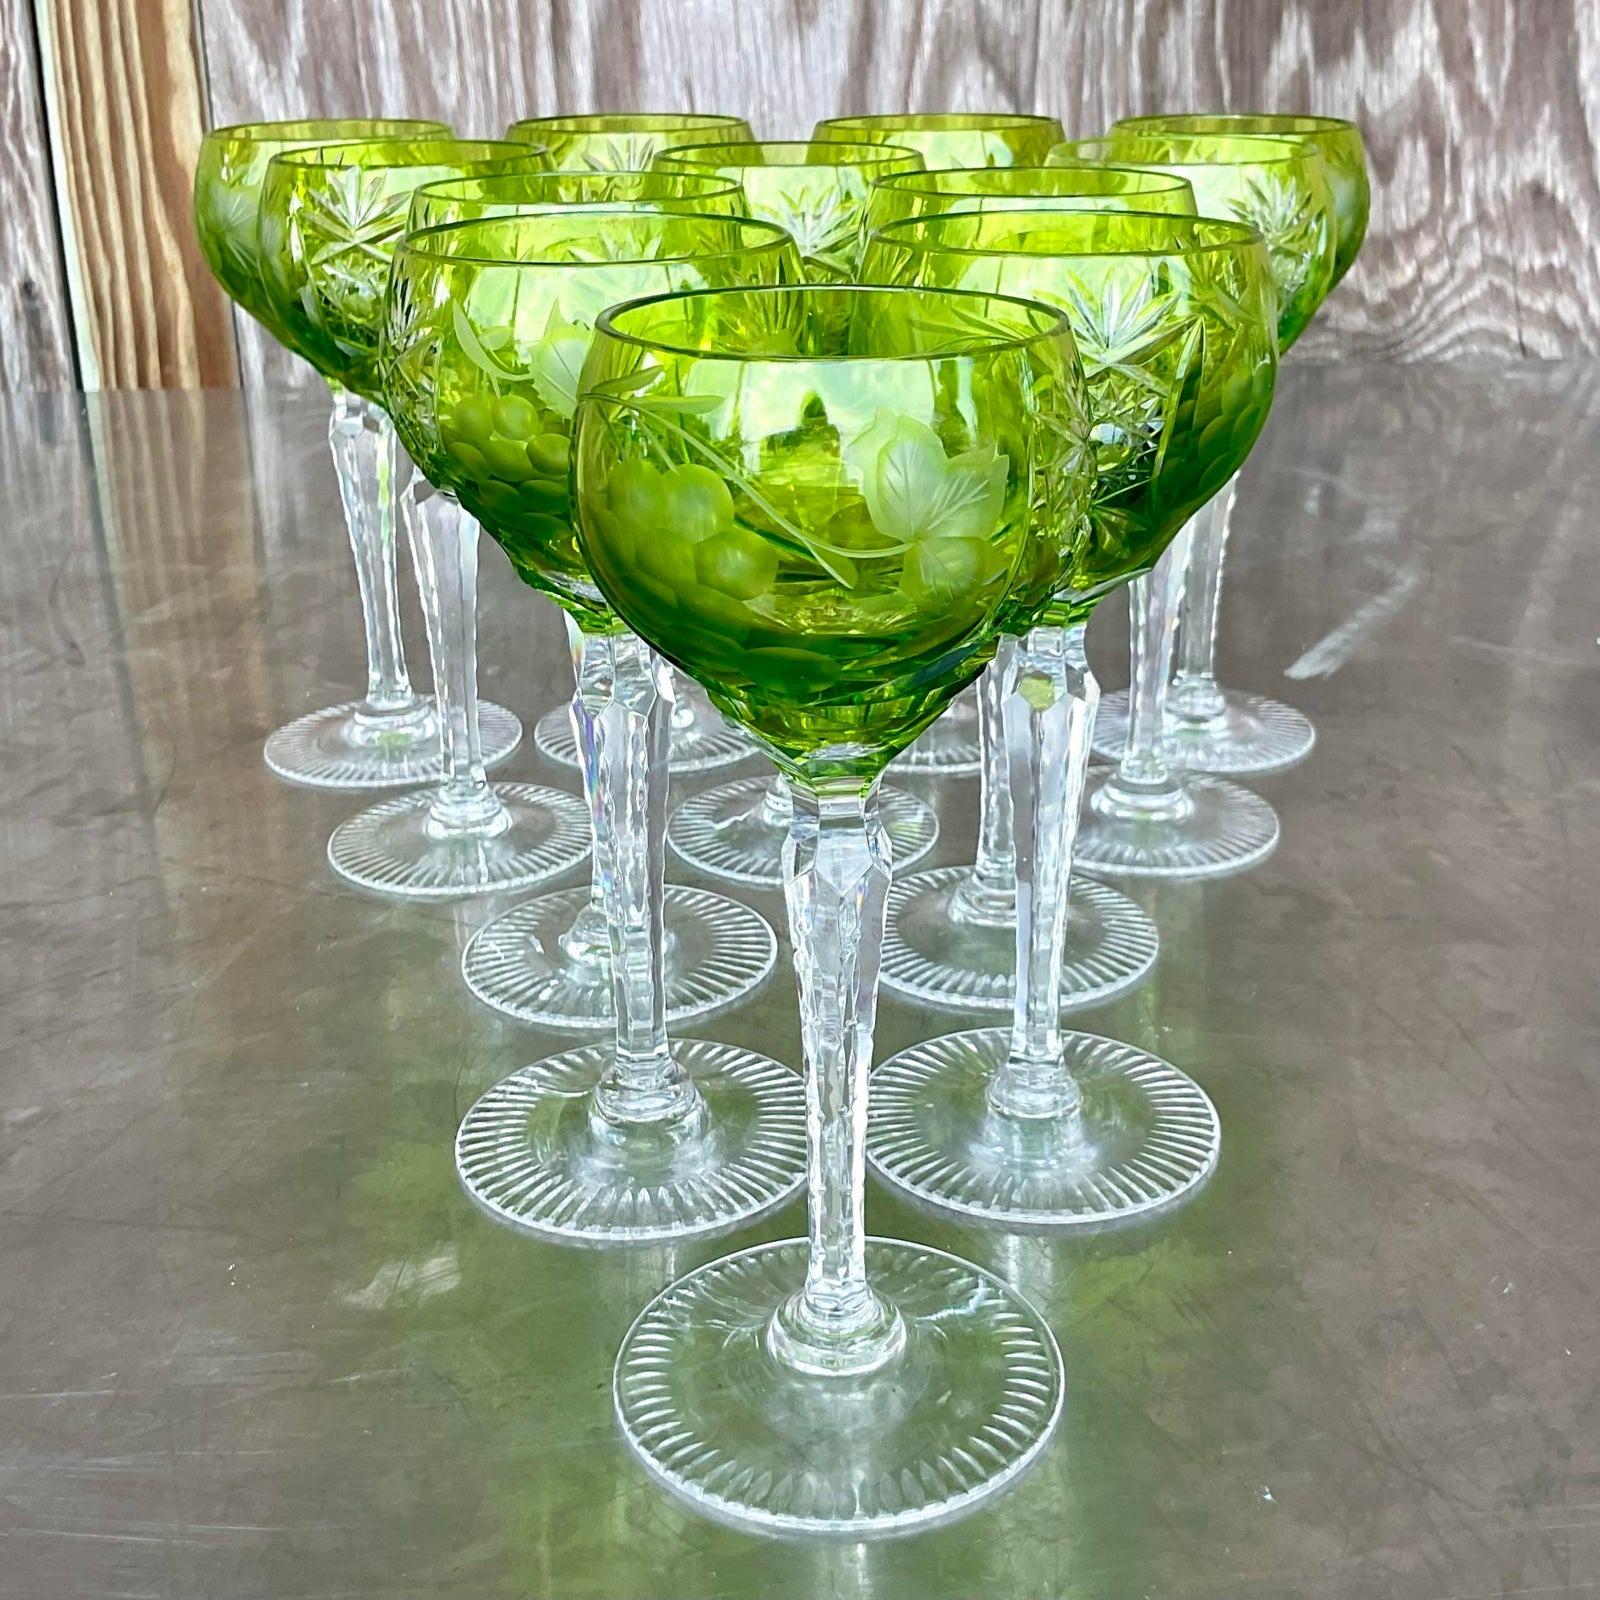 Vintage Regency Emerald Cut Crystal Wine Glasses - Set of 12 In Good Condition For Sale In west palm beach, FL